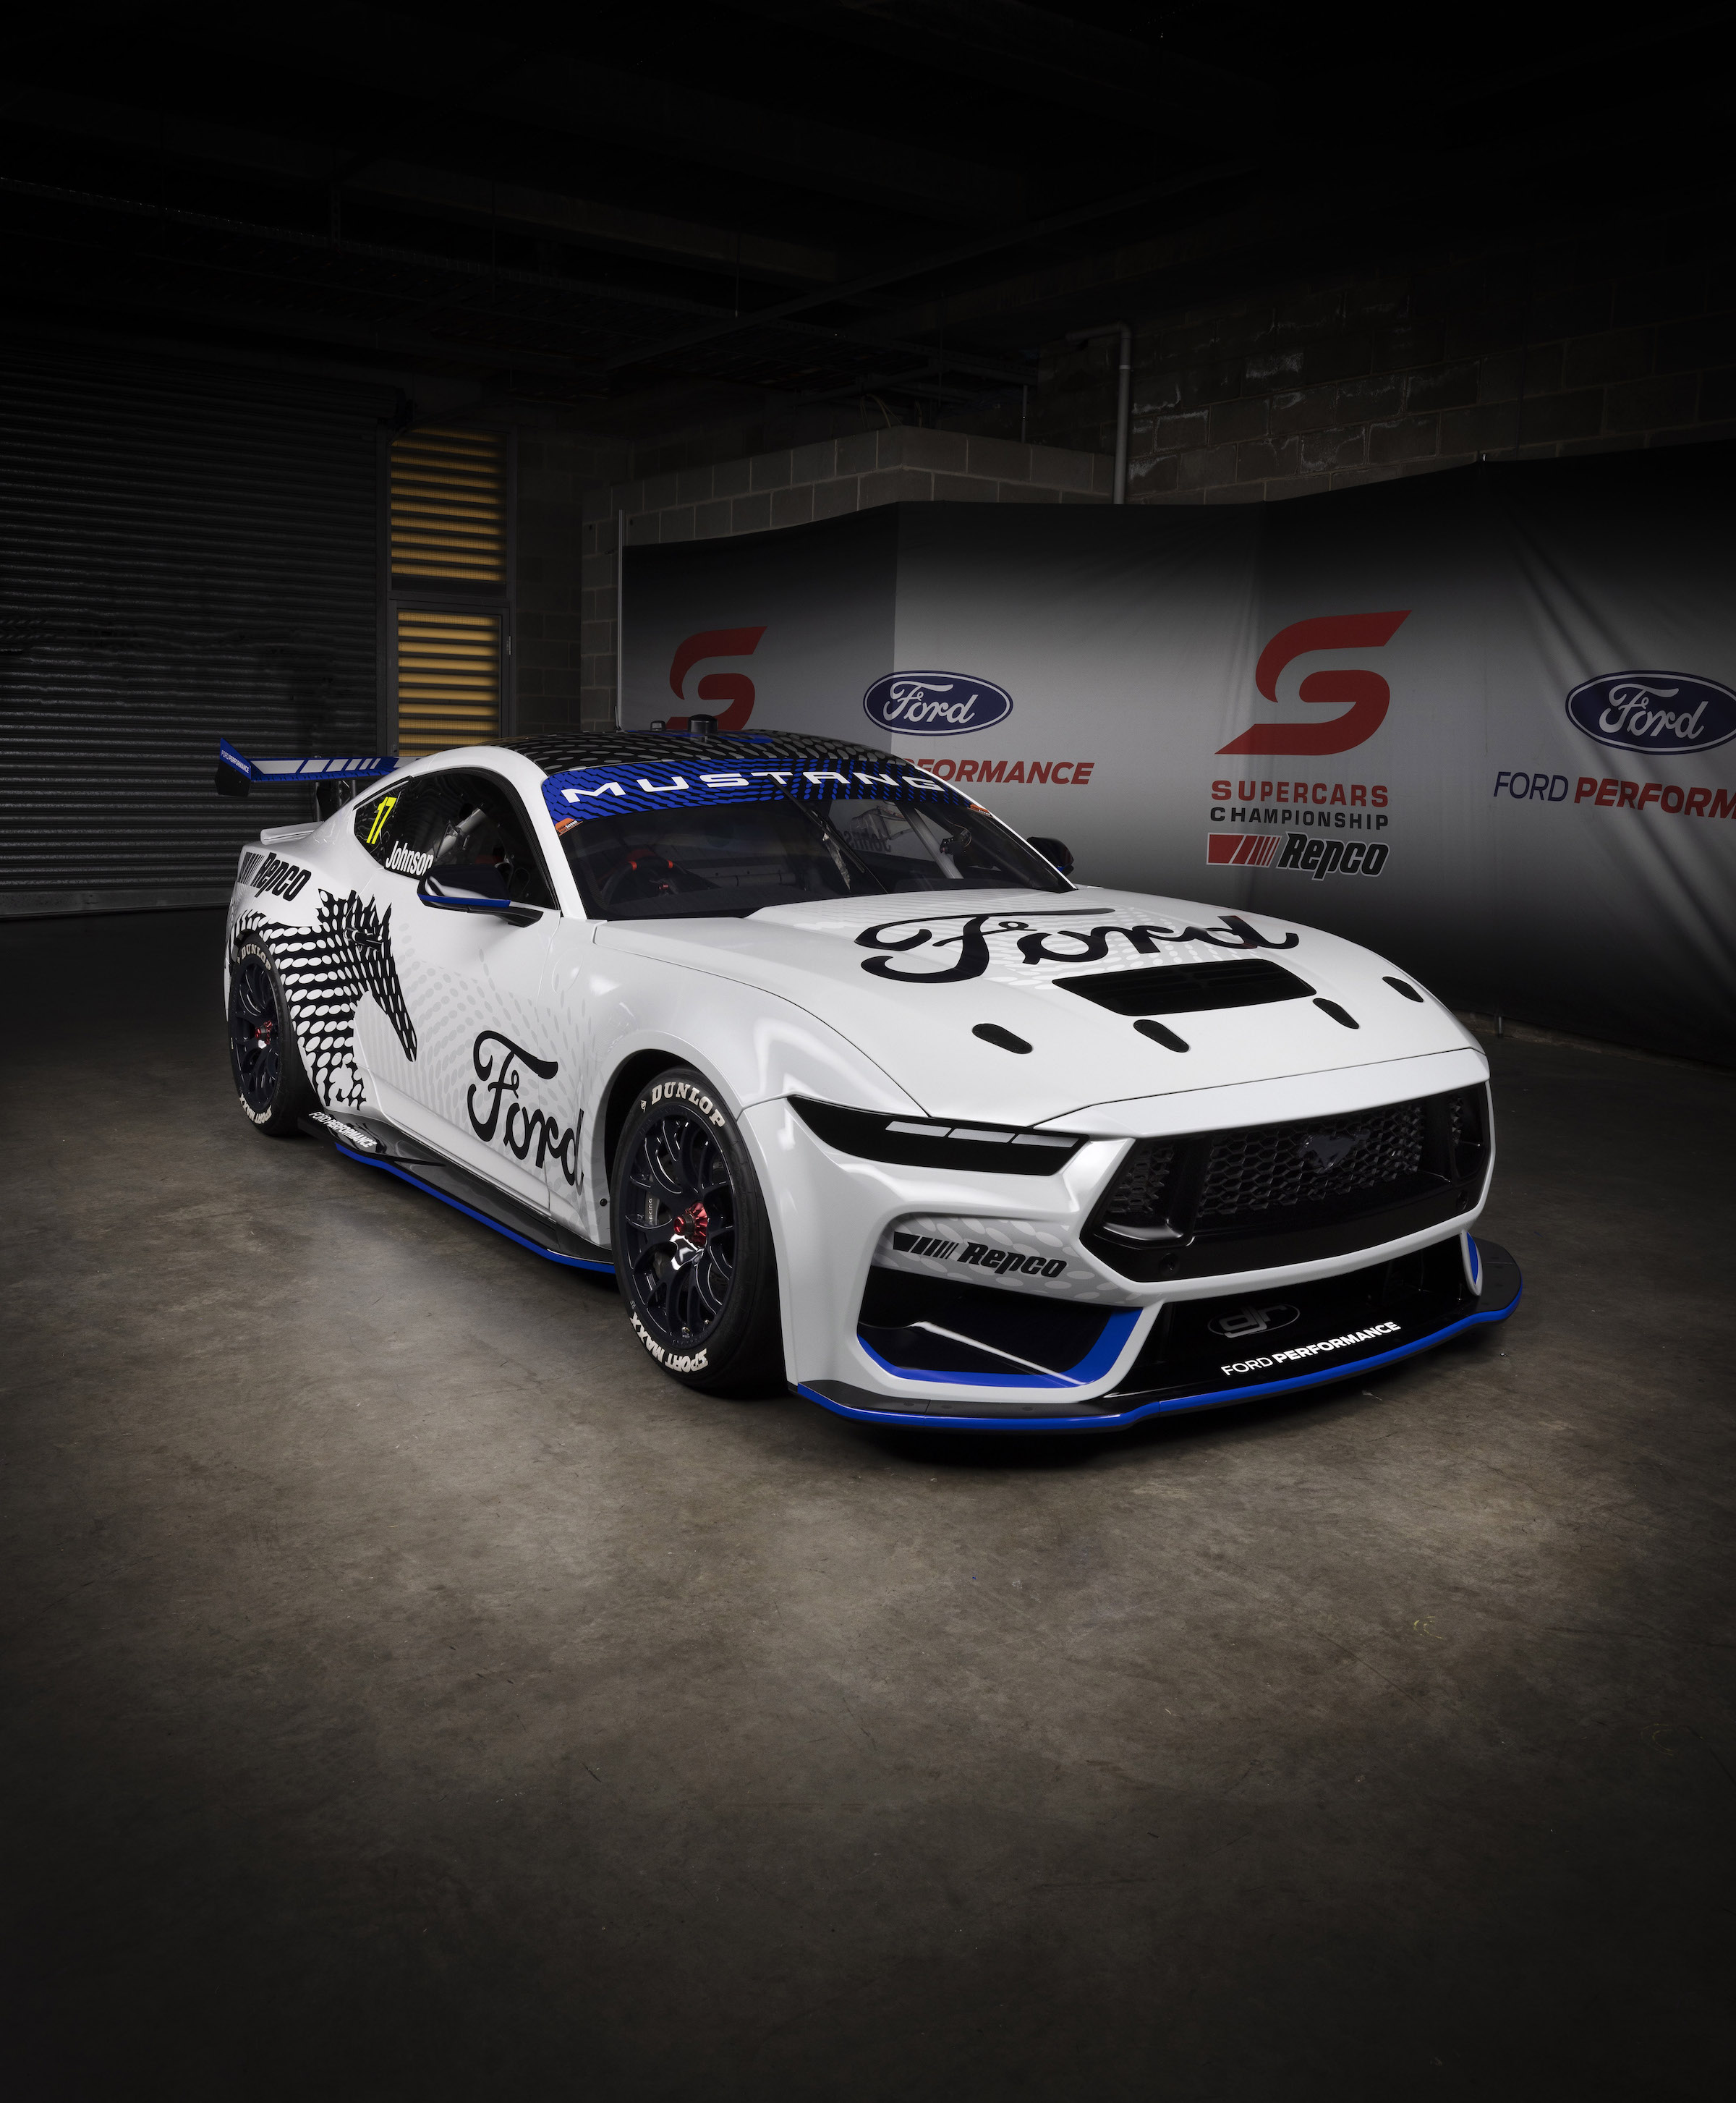 S650 Mustang All-New Ford Mustang (S650) GT Supercars Race Car Revealed at Bathurst 1000 EV-11-22-1J1A0636